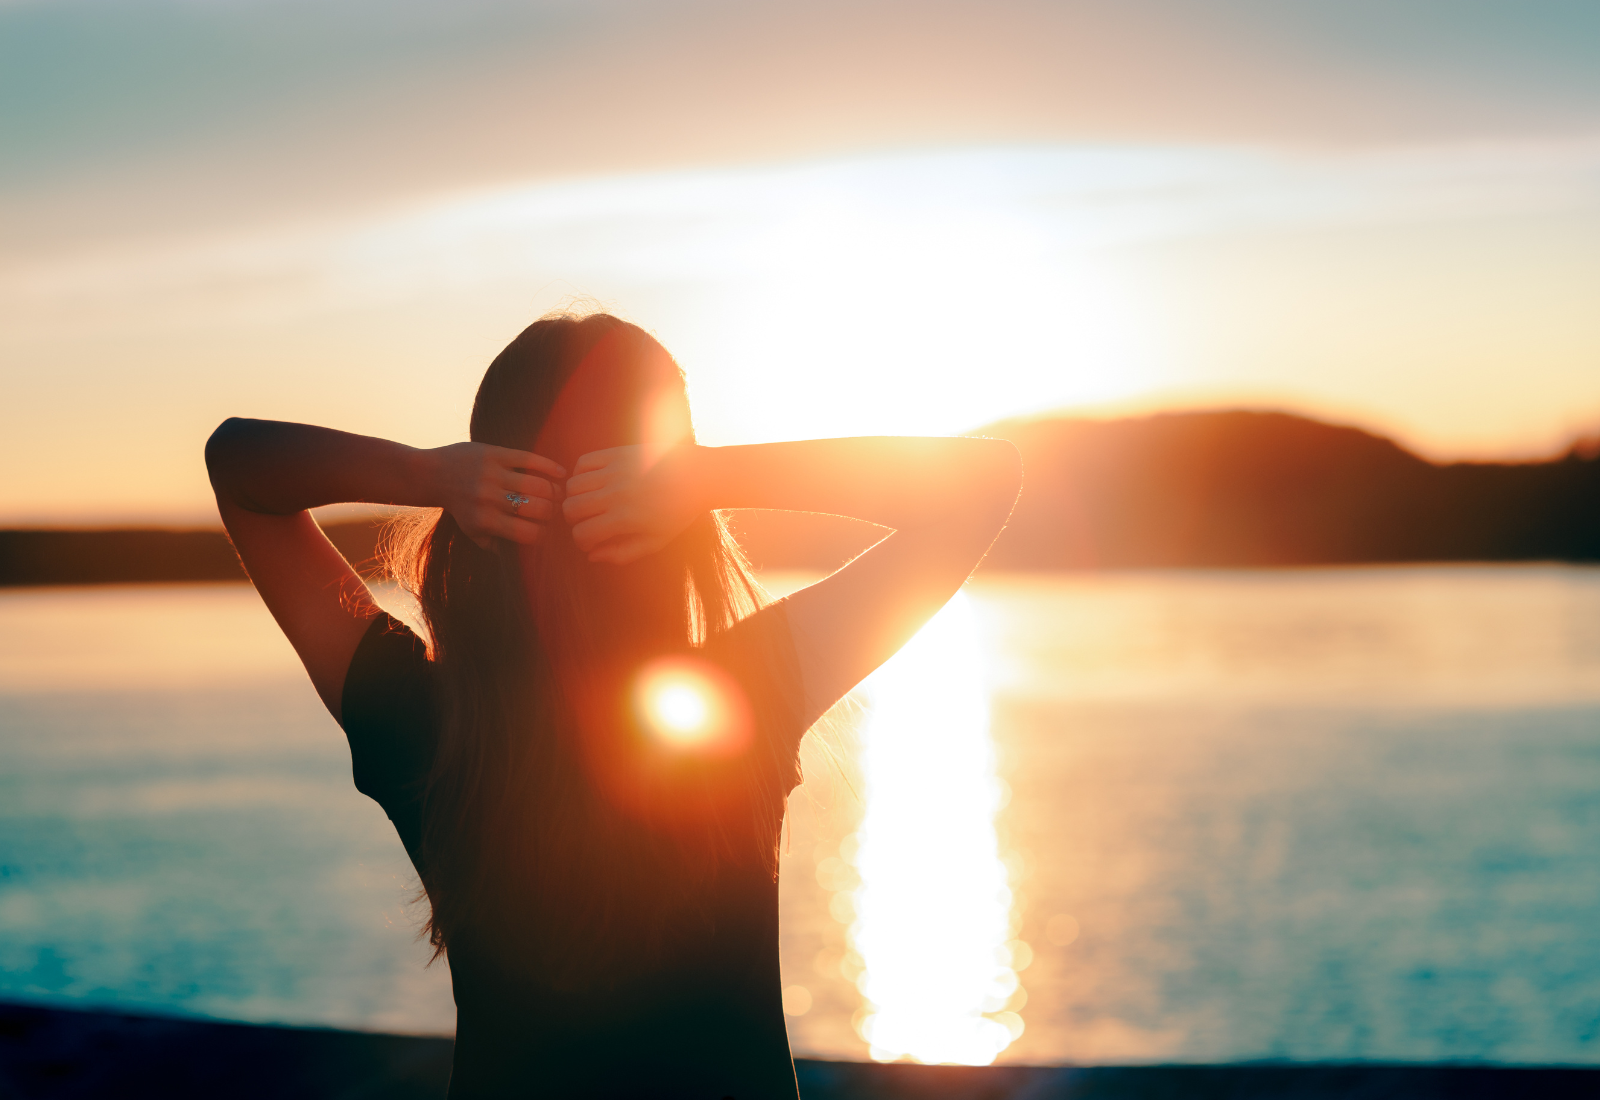 Image of a hopeful woman looking over a body of water at a sunrise